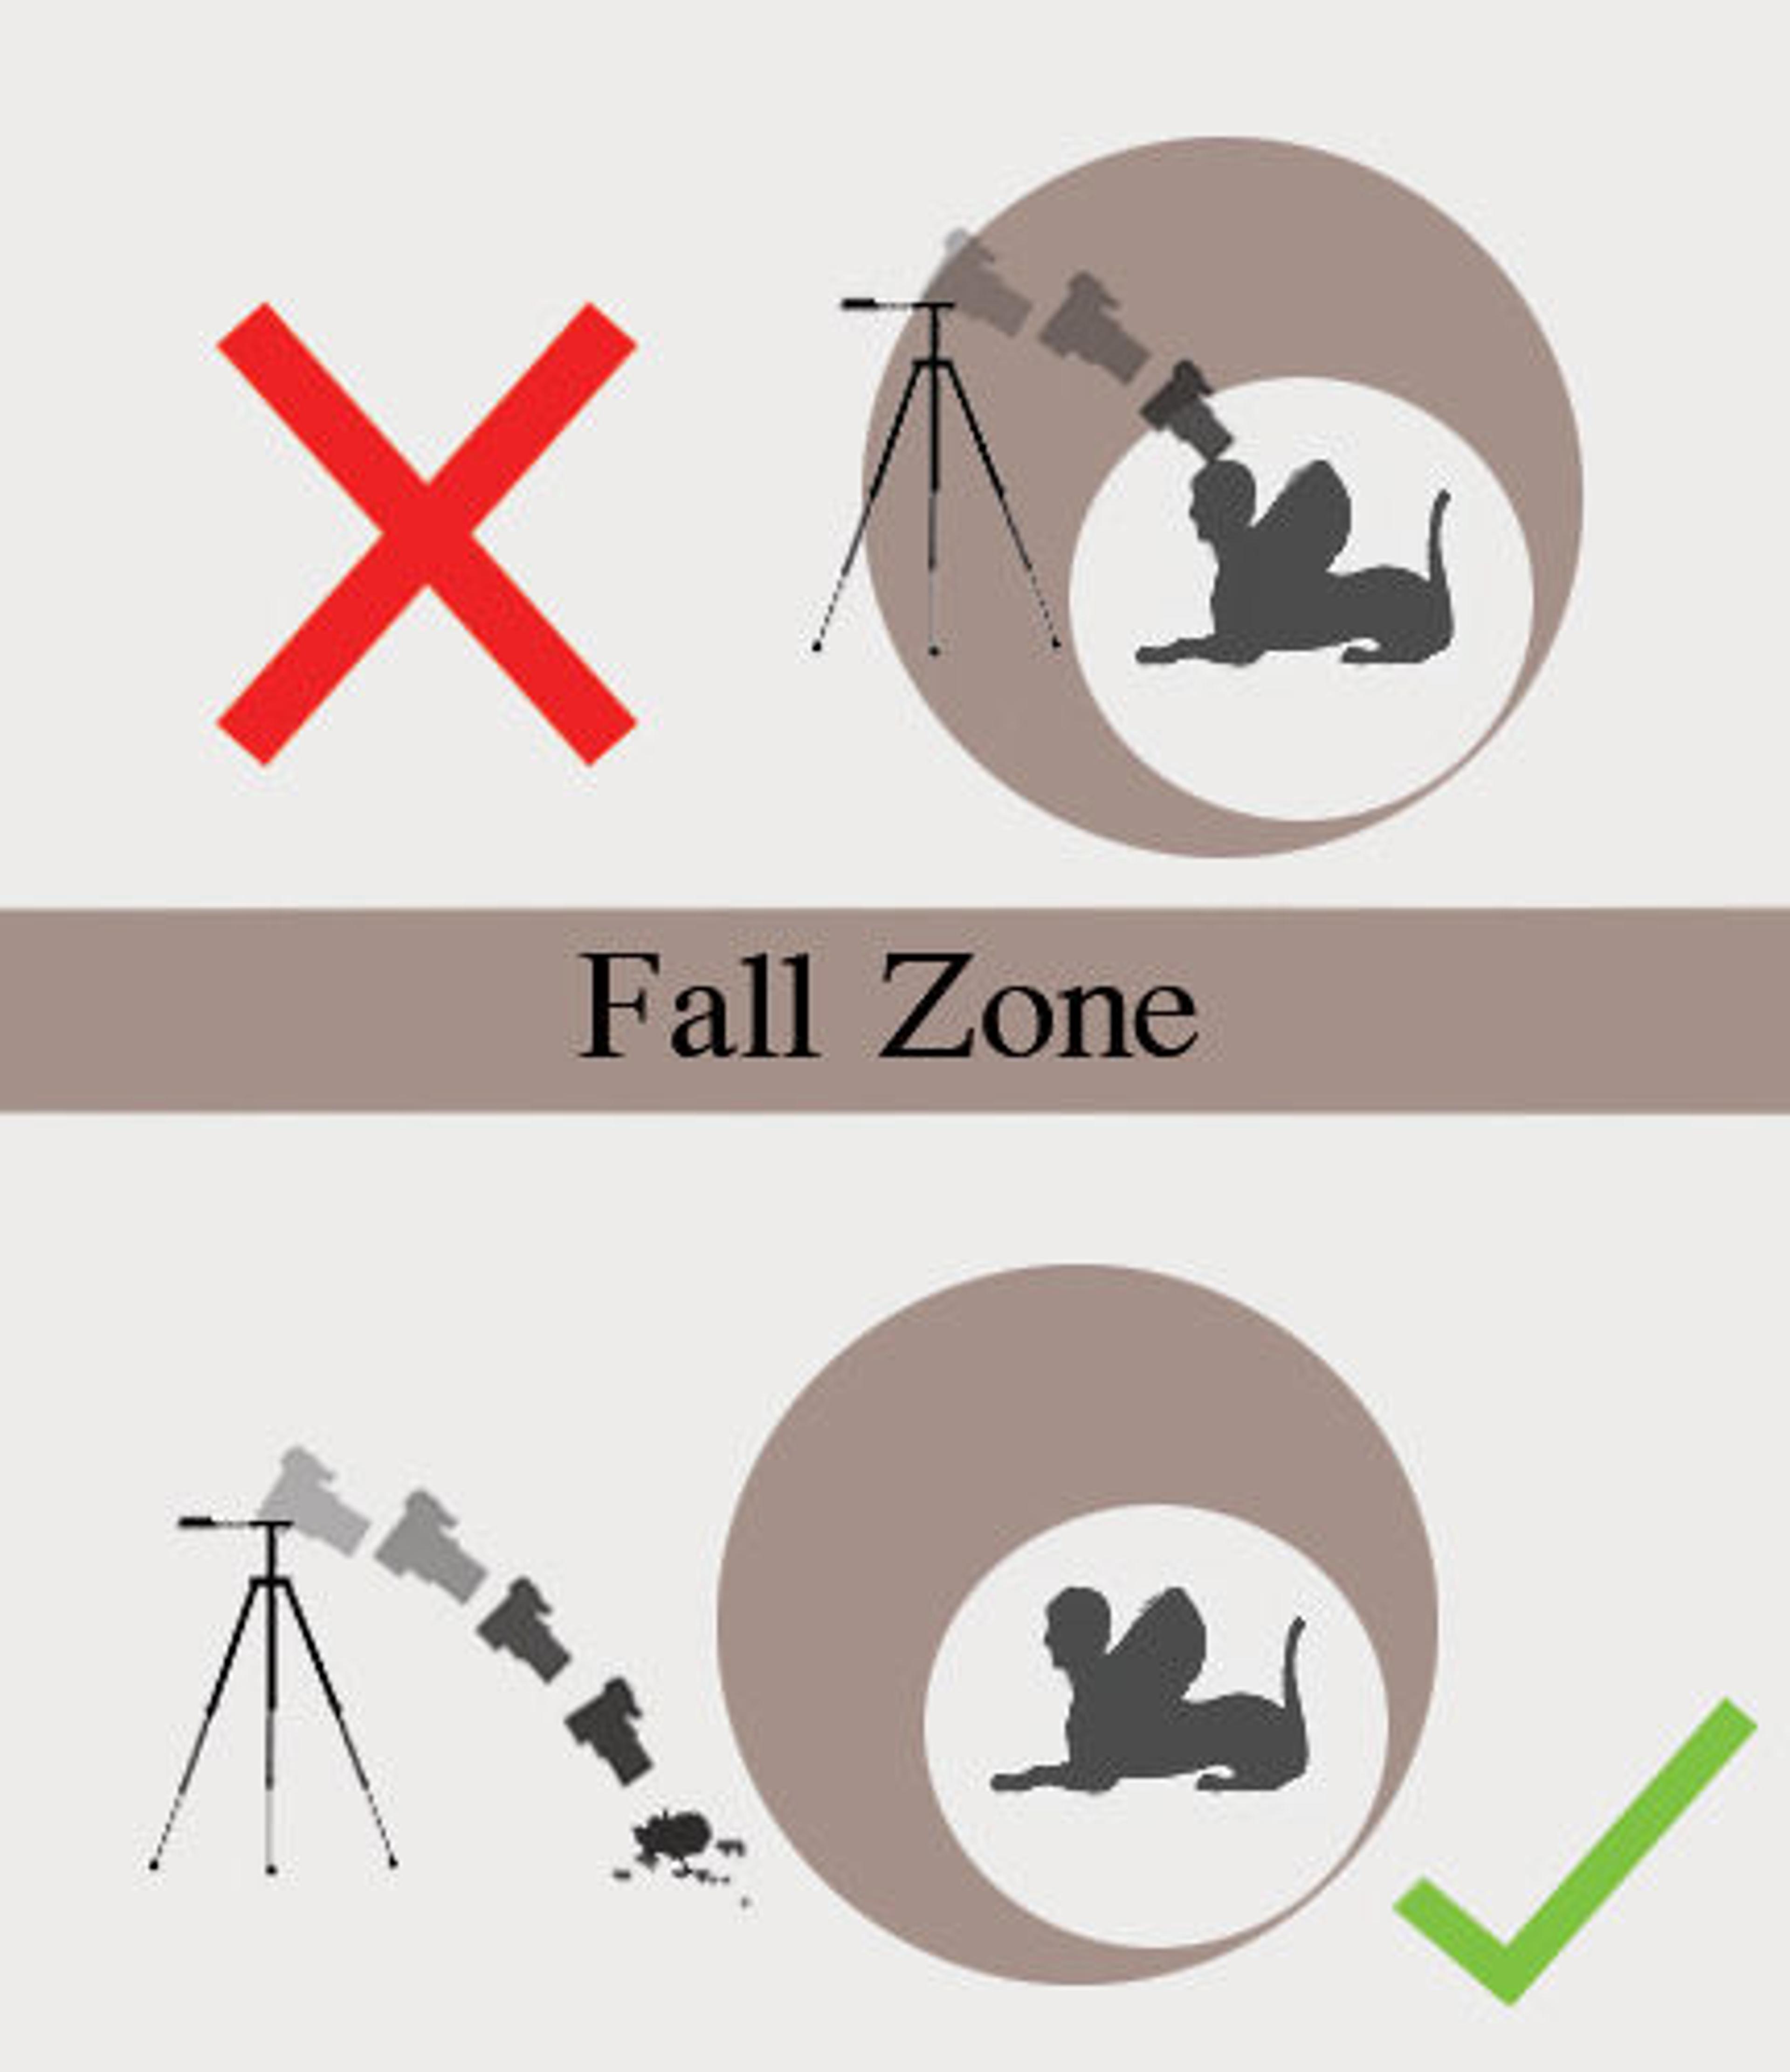 Diagram of the fall zone